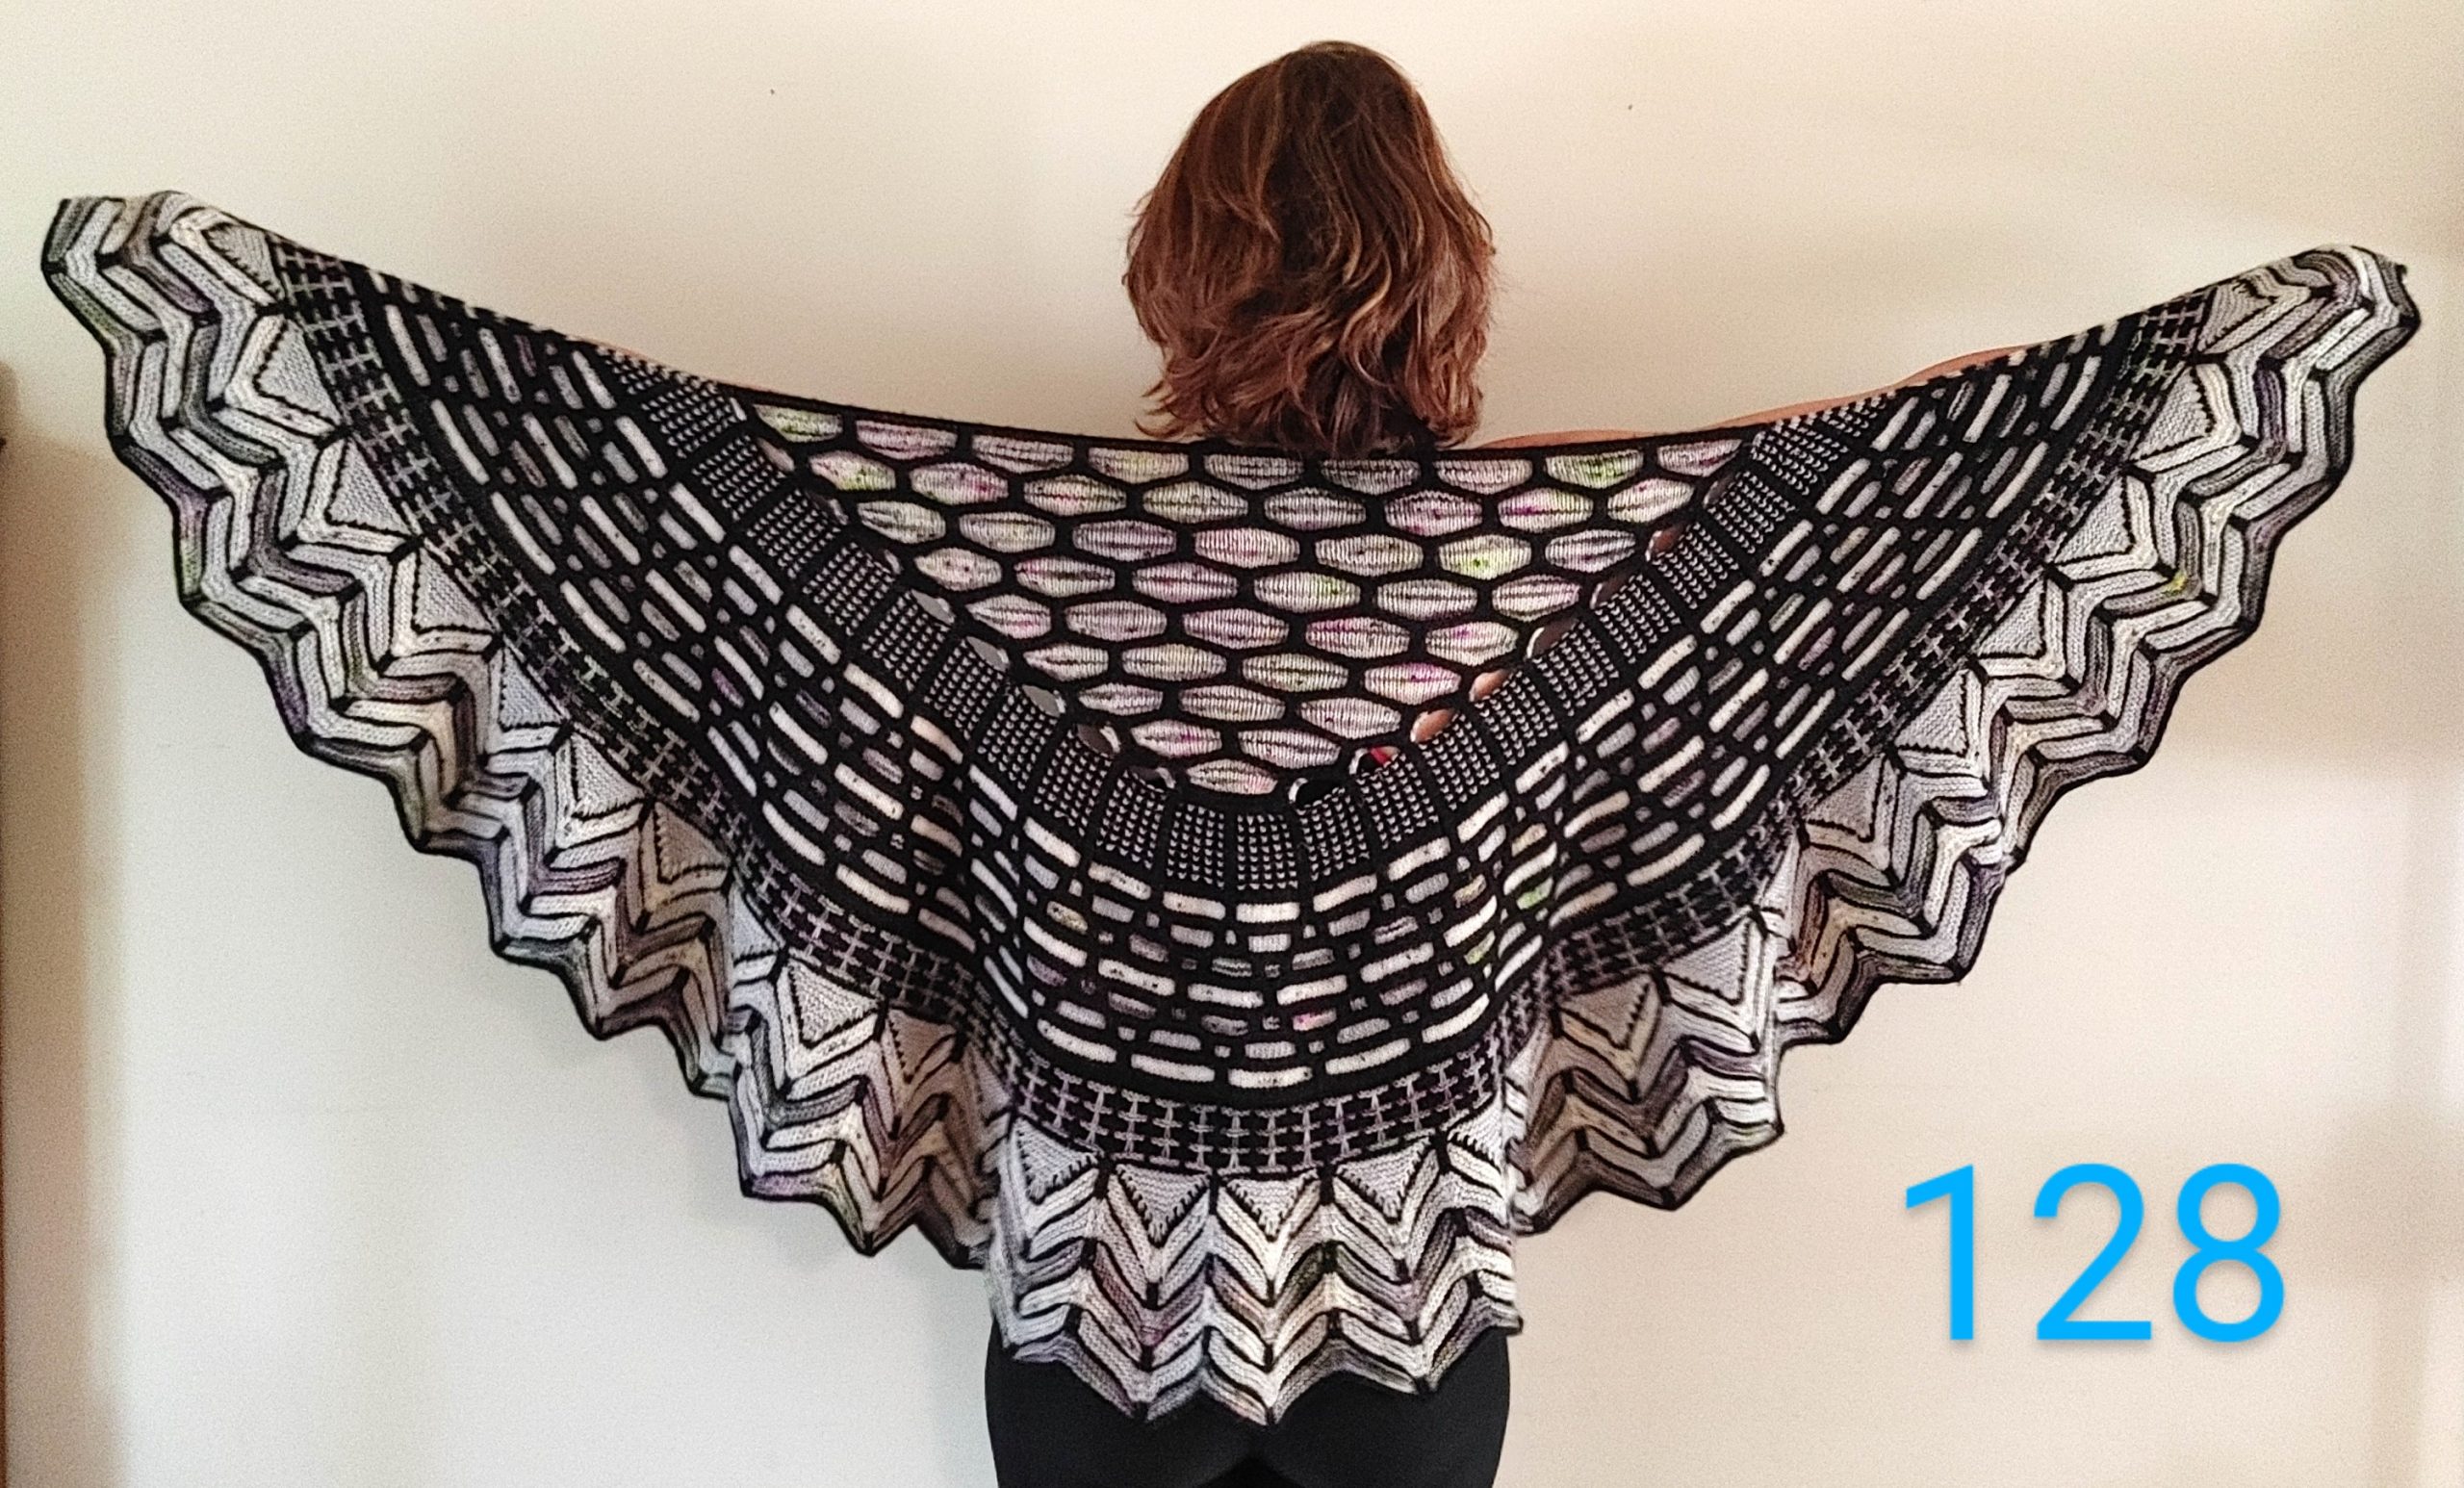 A woman models a black and white hand knit shawl